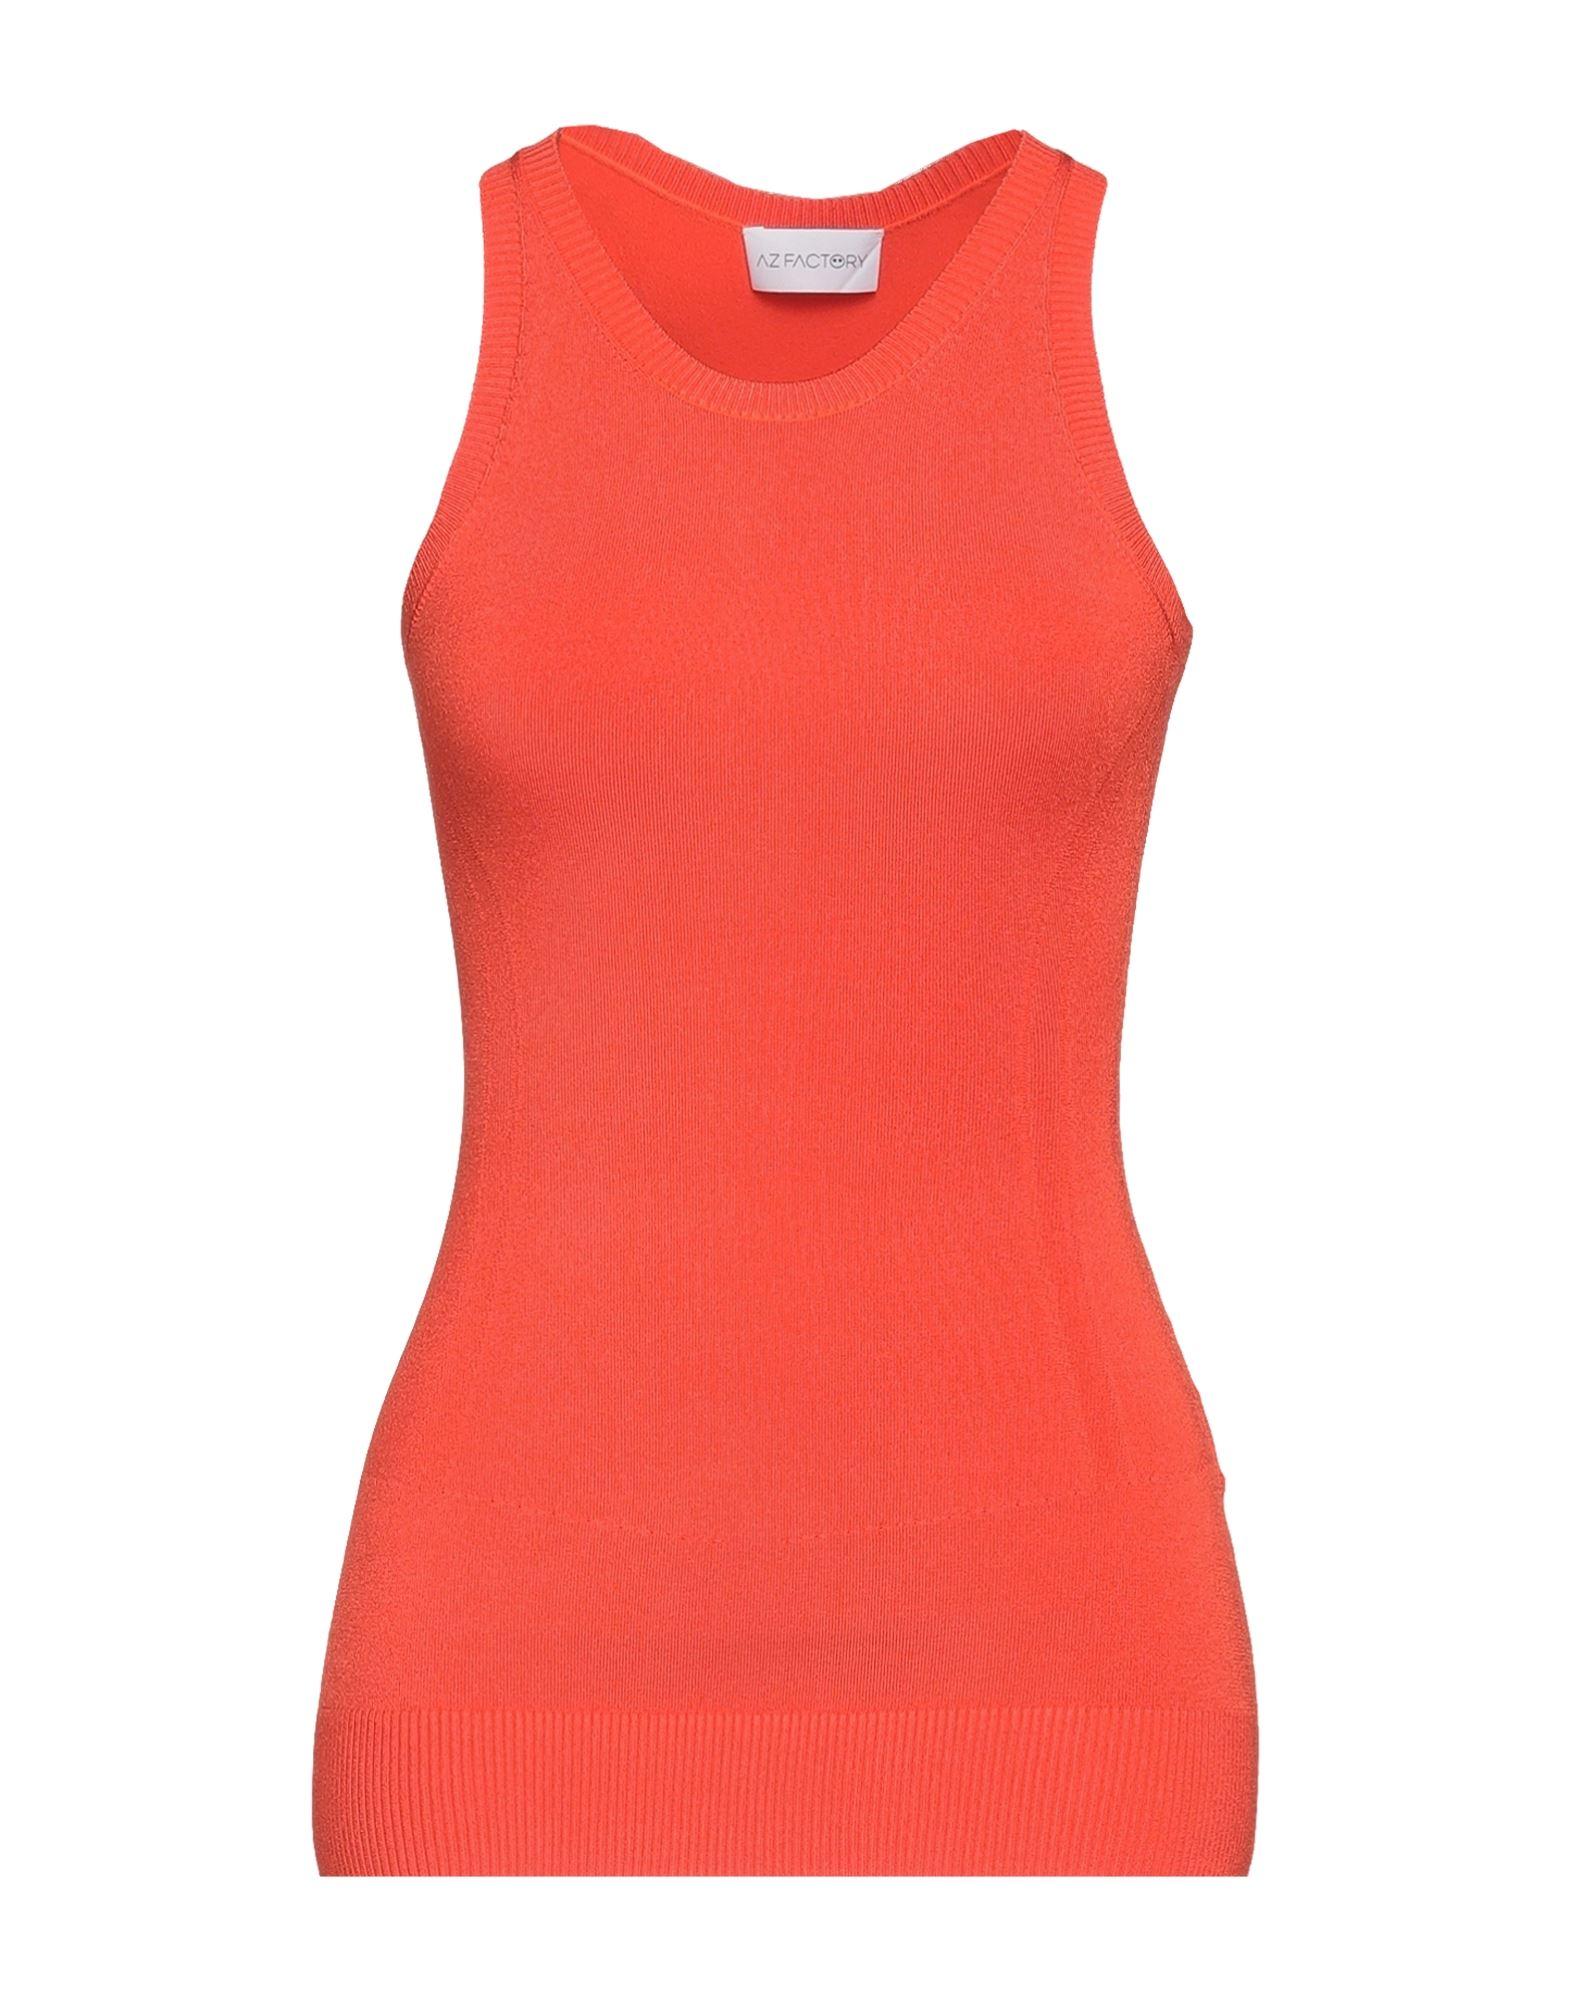 AZ FACTORY Synthetic Vest in Pink Womens Clothing Tops Sleeveless and tank tops 